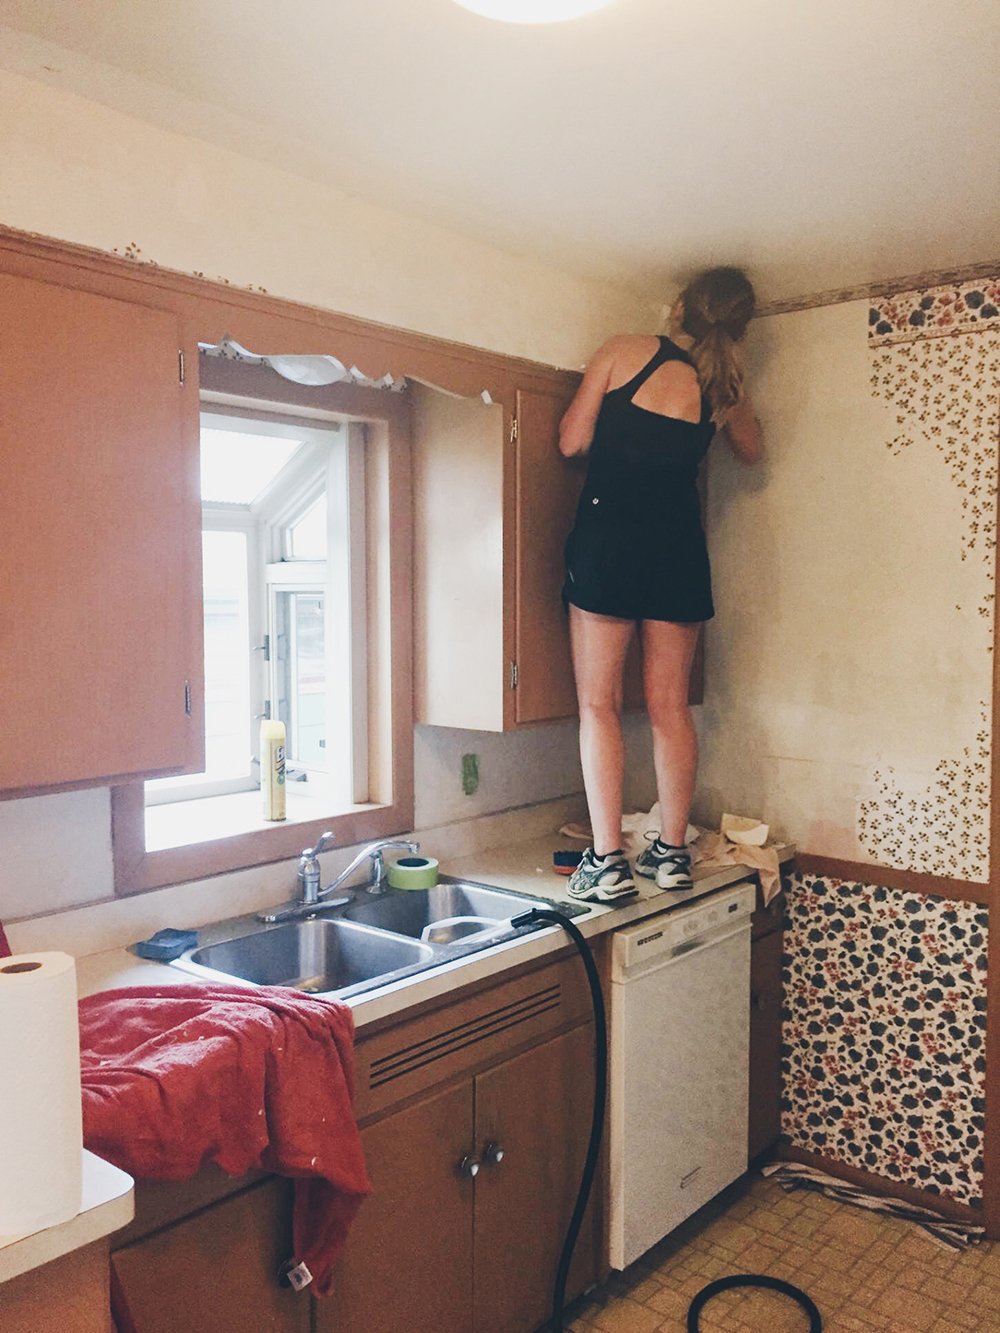 How to Remove Wallpaper Without a Steamer